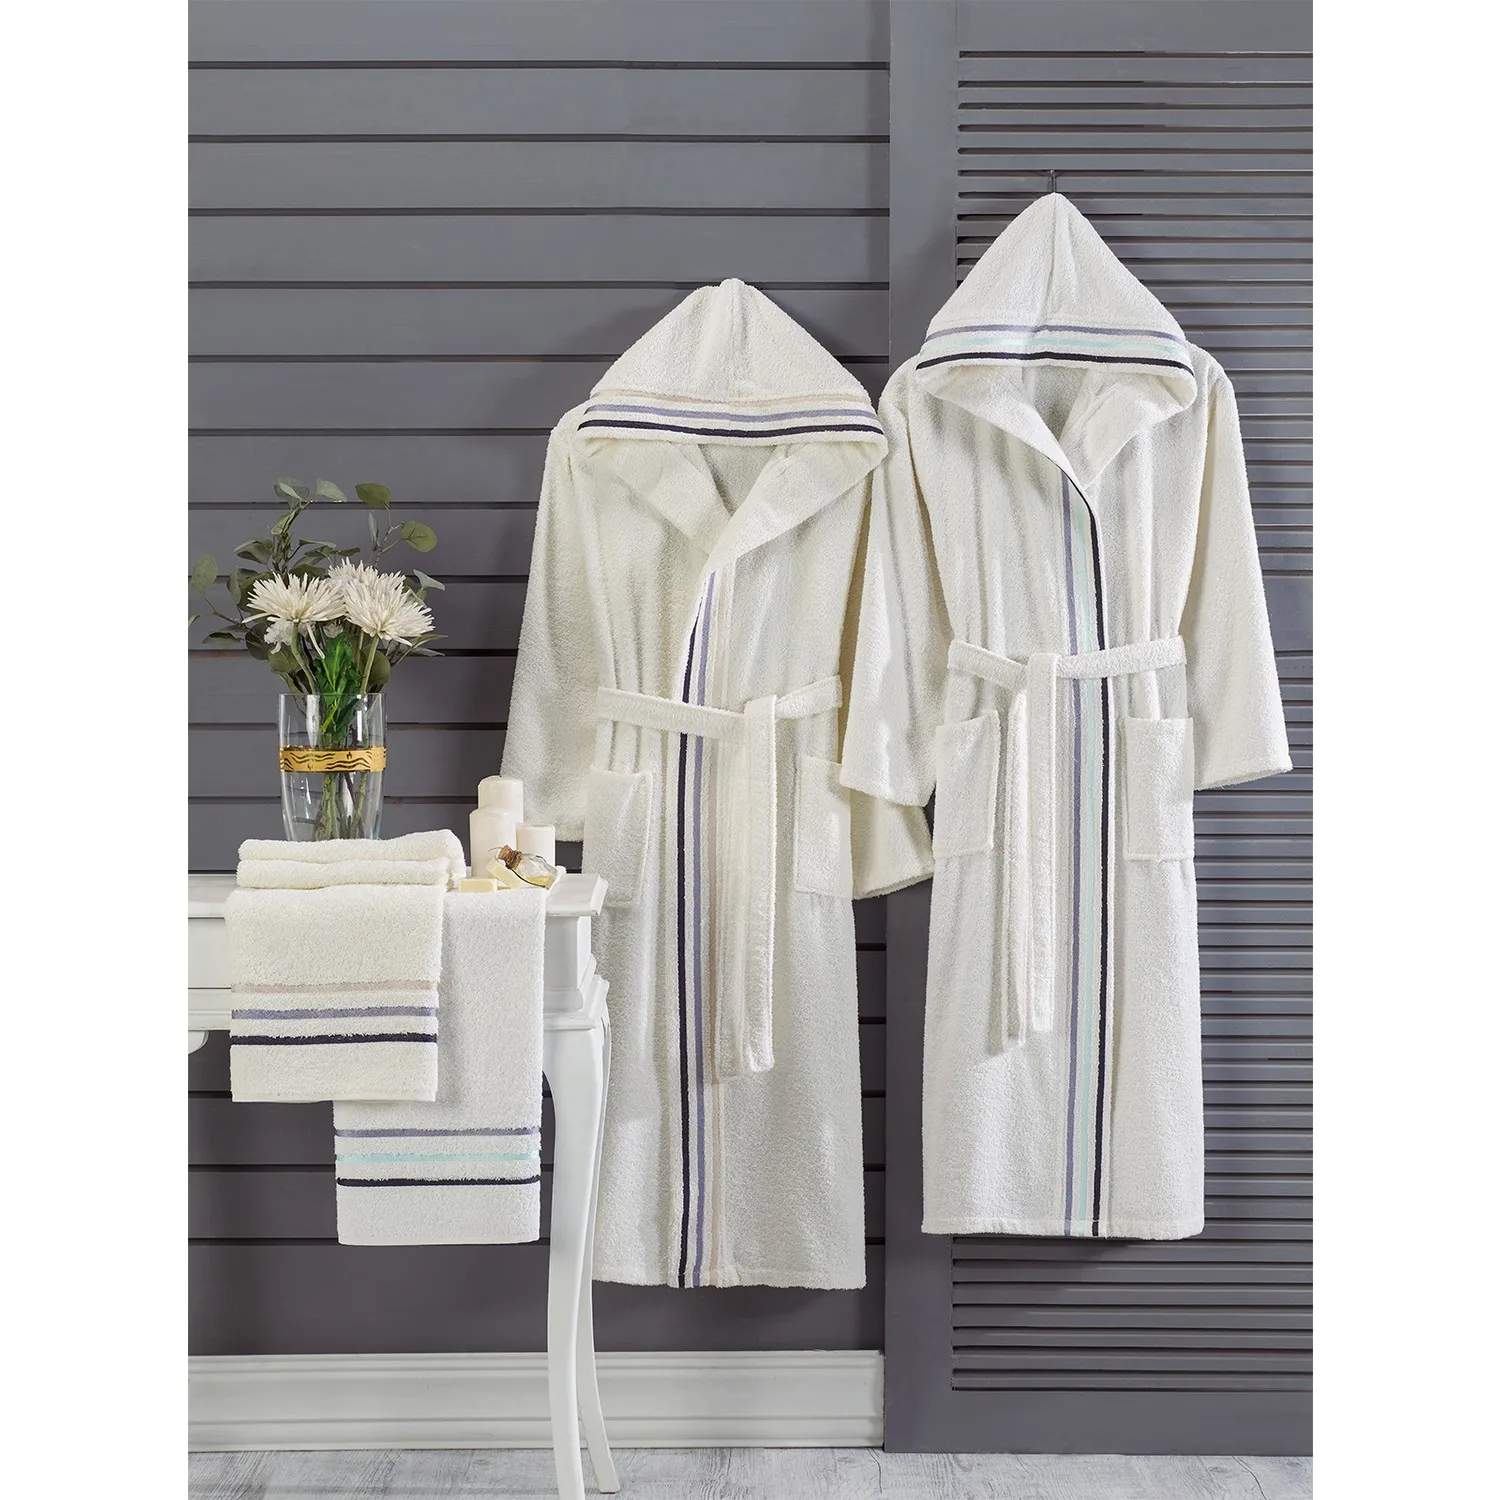 Özenev Hooded 4 Piece Family Bath Robe Set Cotton Striped Groined Soft Luxury Anthracite Water Green Live Luminous Fabric